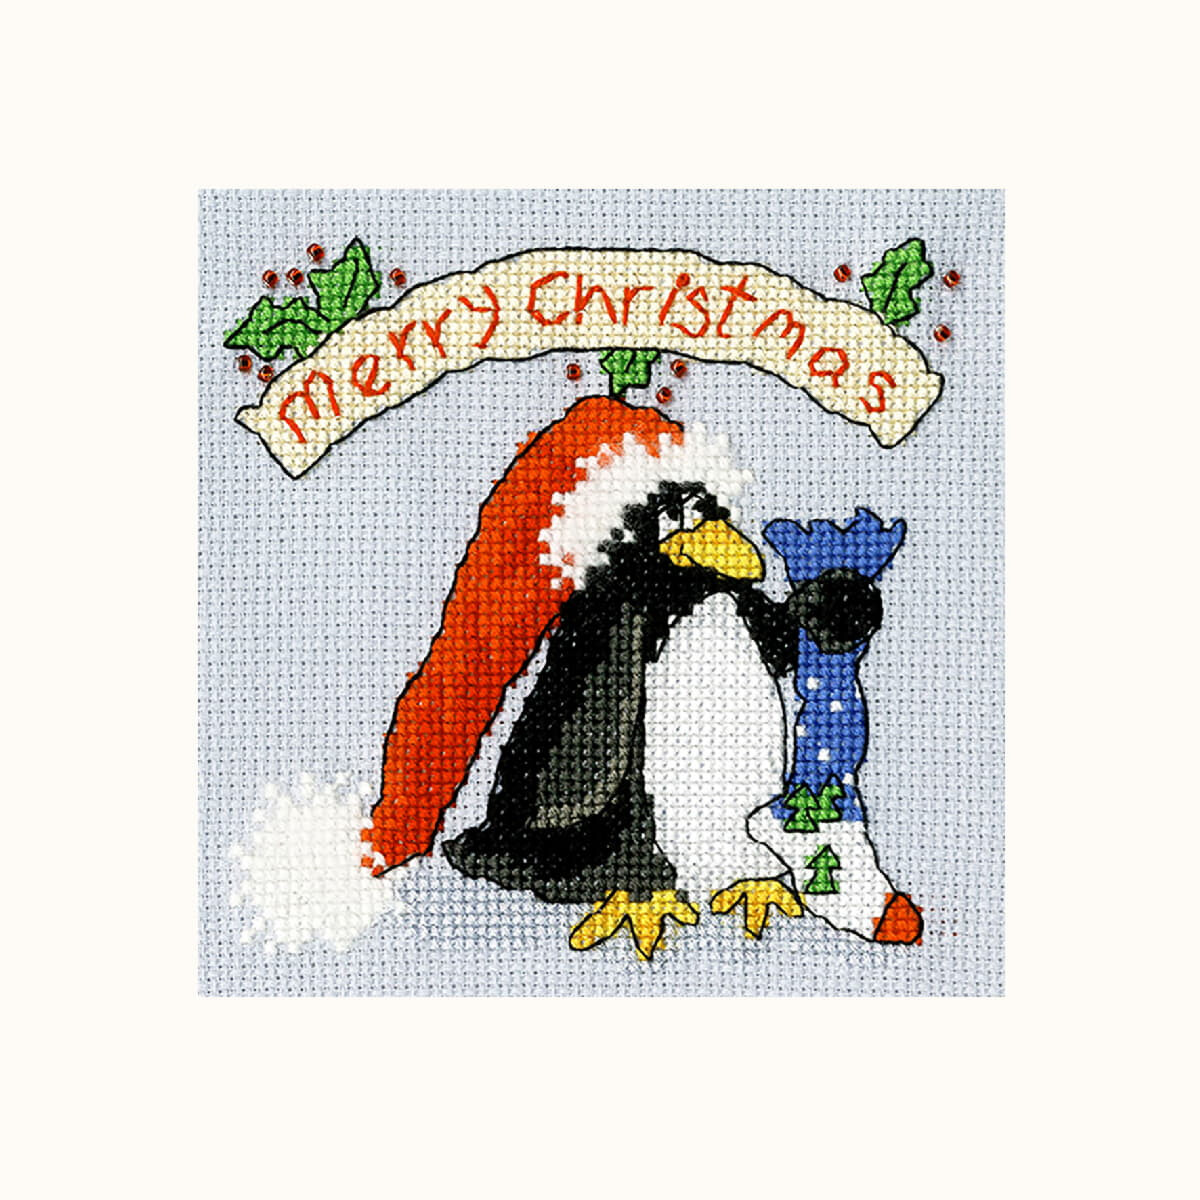 An embroidery kit with cross stitch from Bothy Threads...